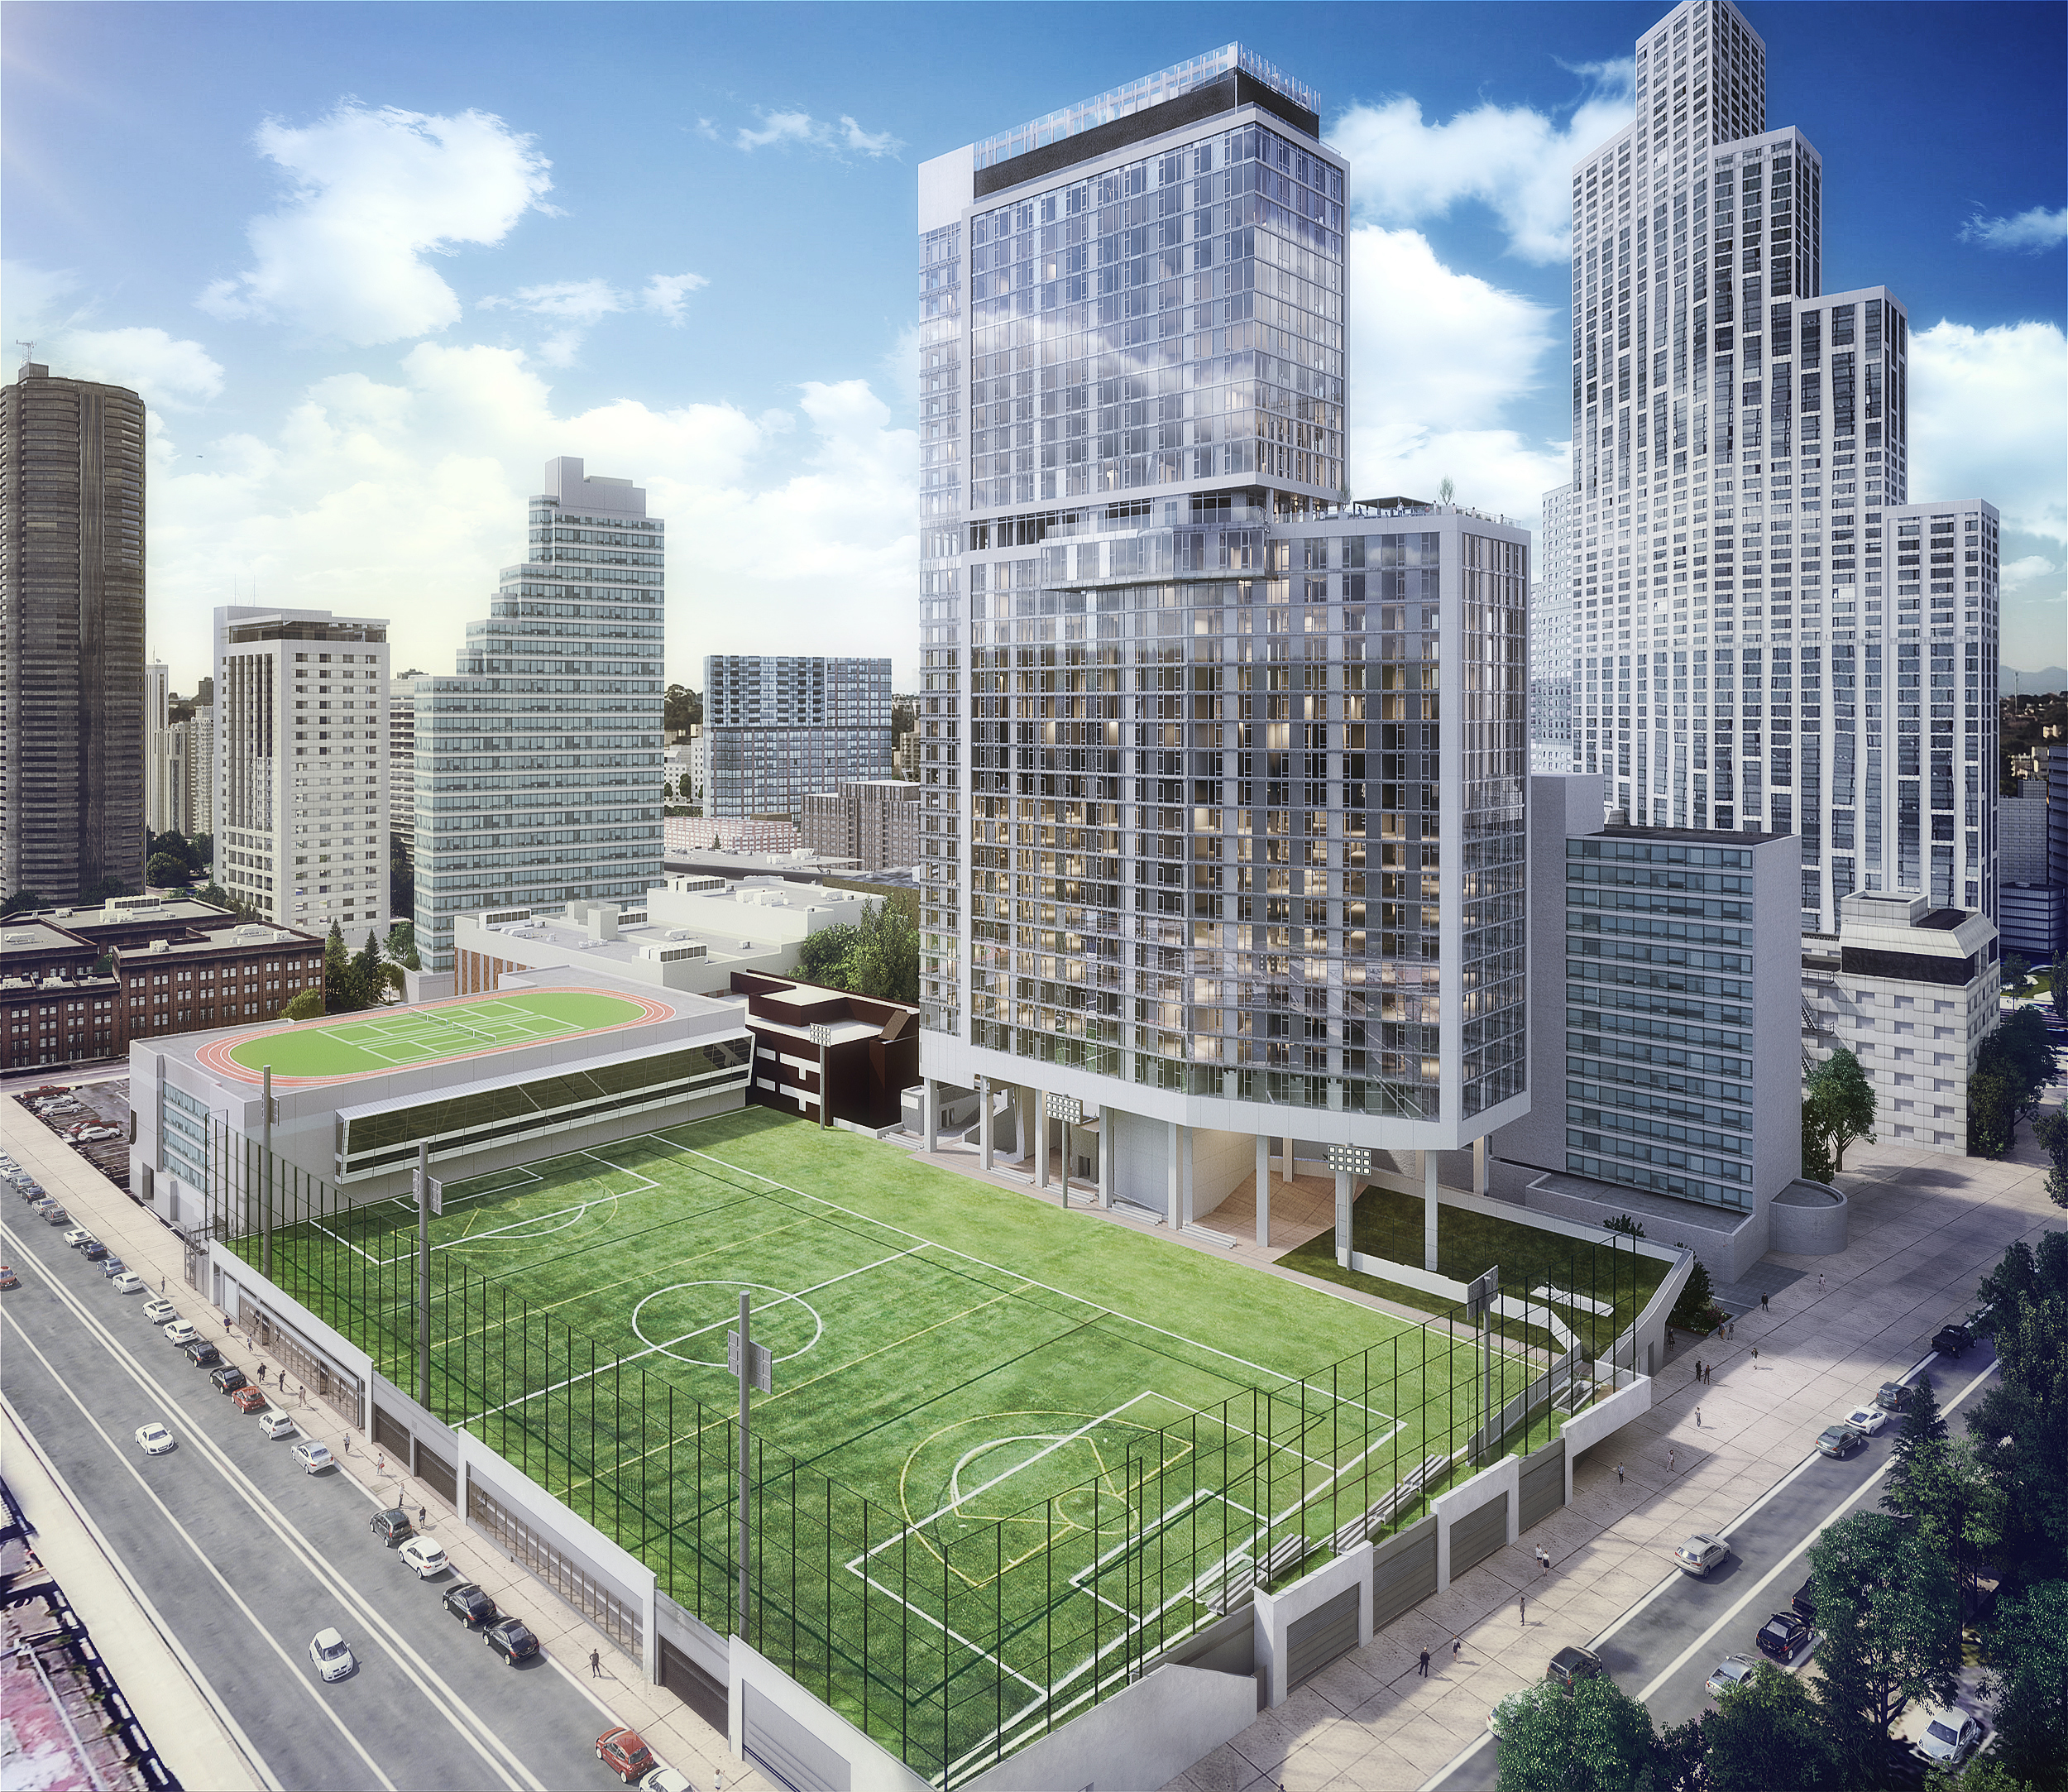 RXR Realty is constructing an apartment building and a university athletic and academic facility on LIU’s Downtown Brooklyn campus. Rendering courtesy of RXR Realty